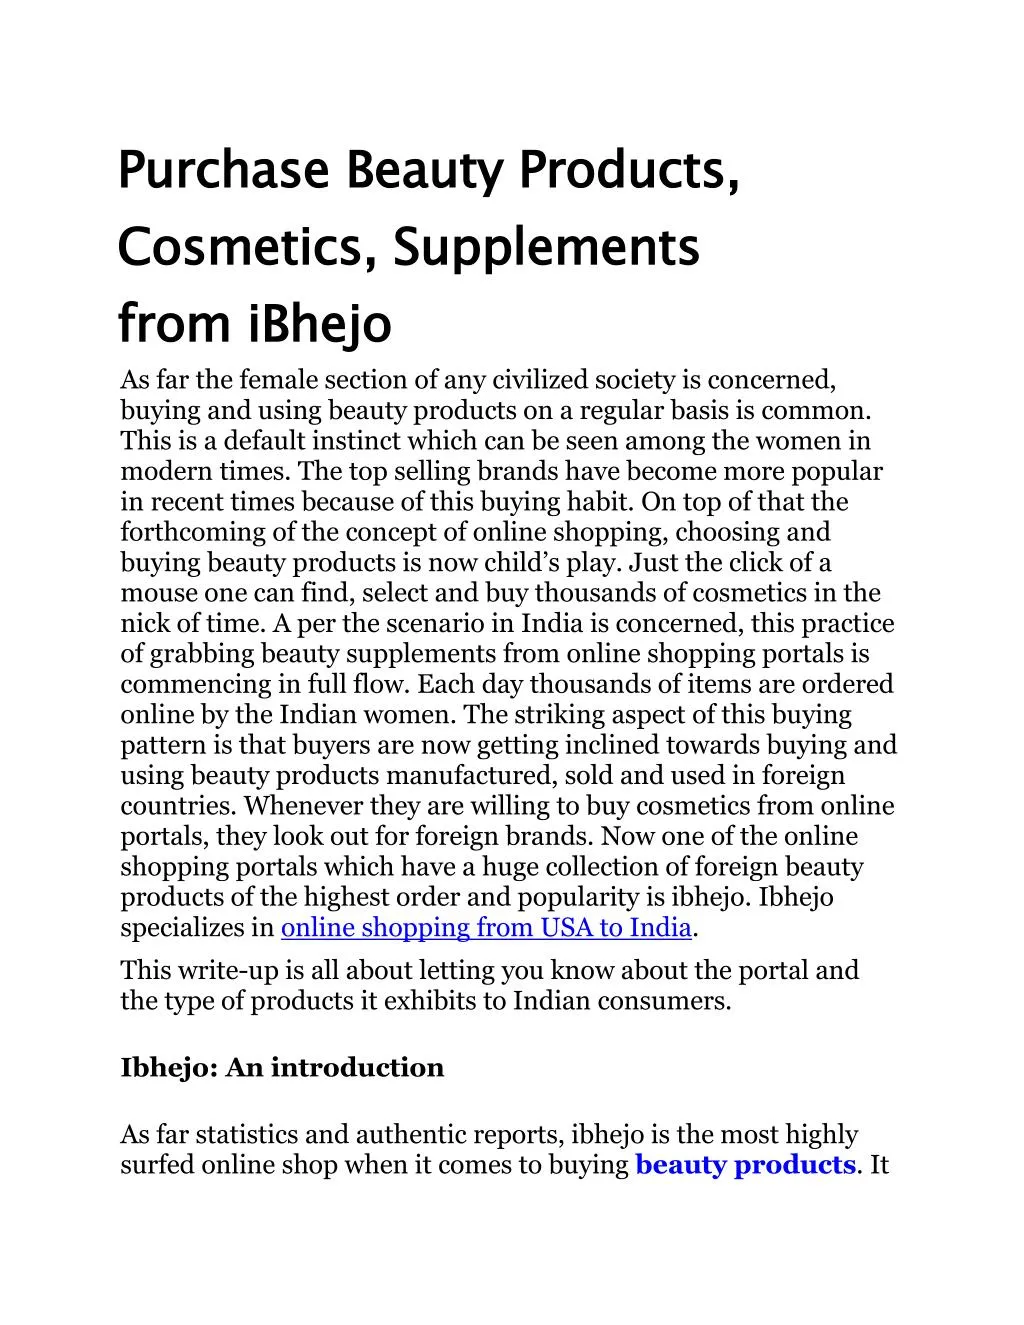 purchase beauty products cosmetics supplements